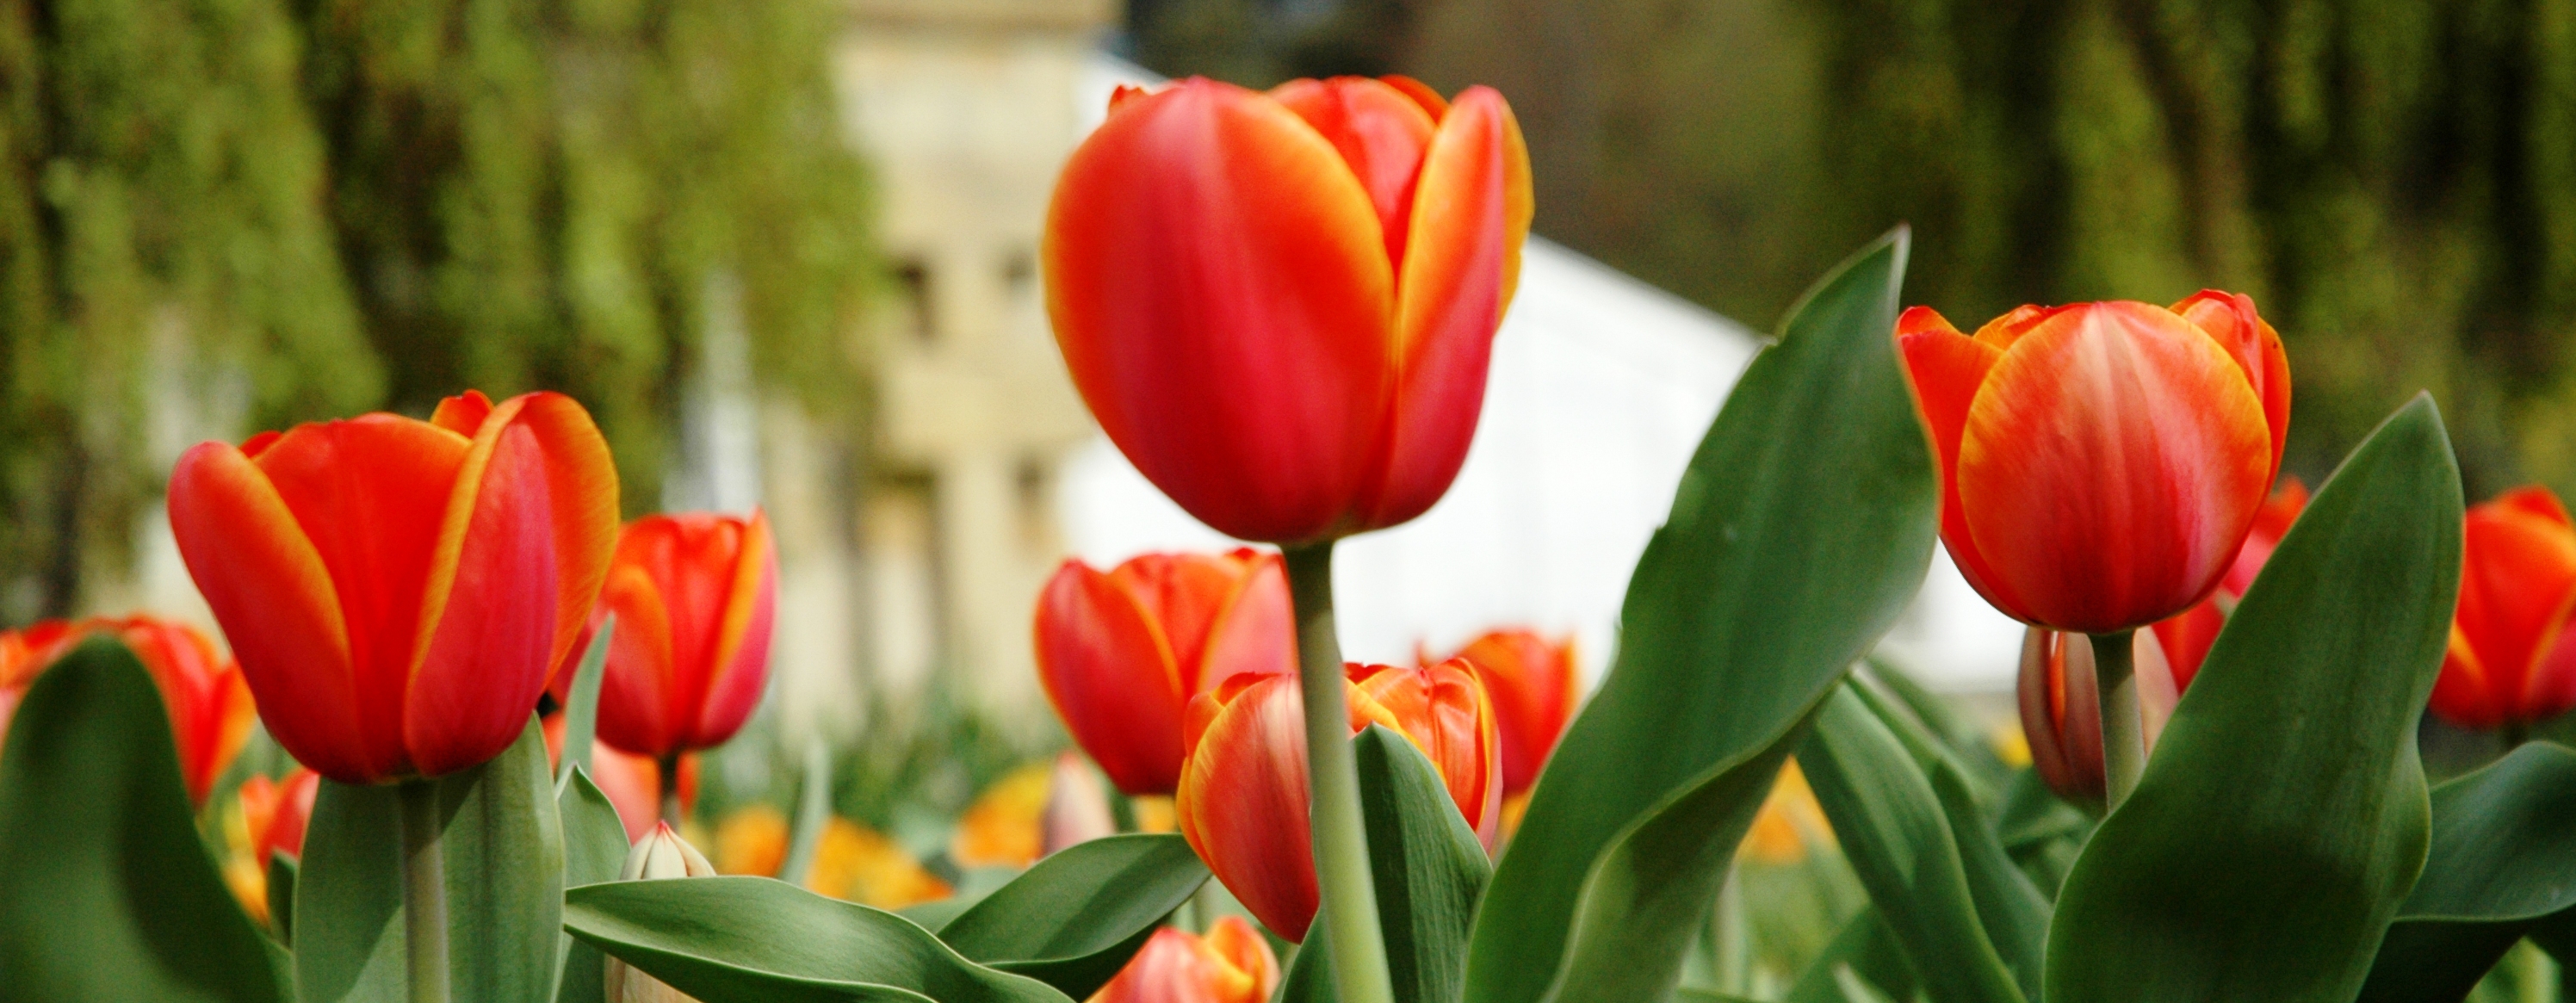 Close up of red Tulips